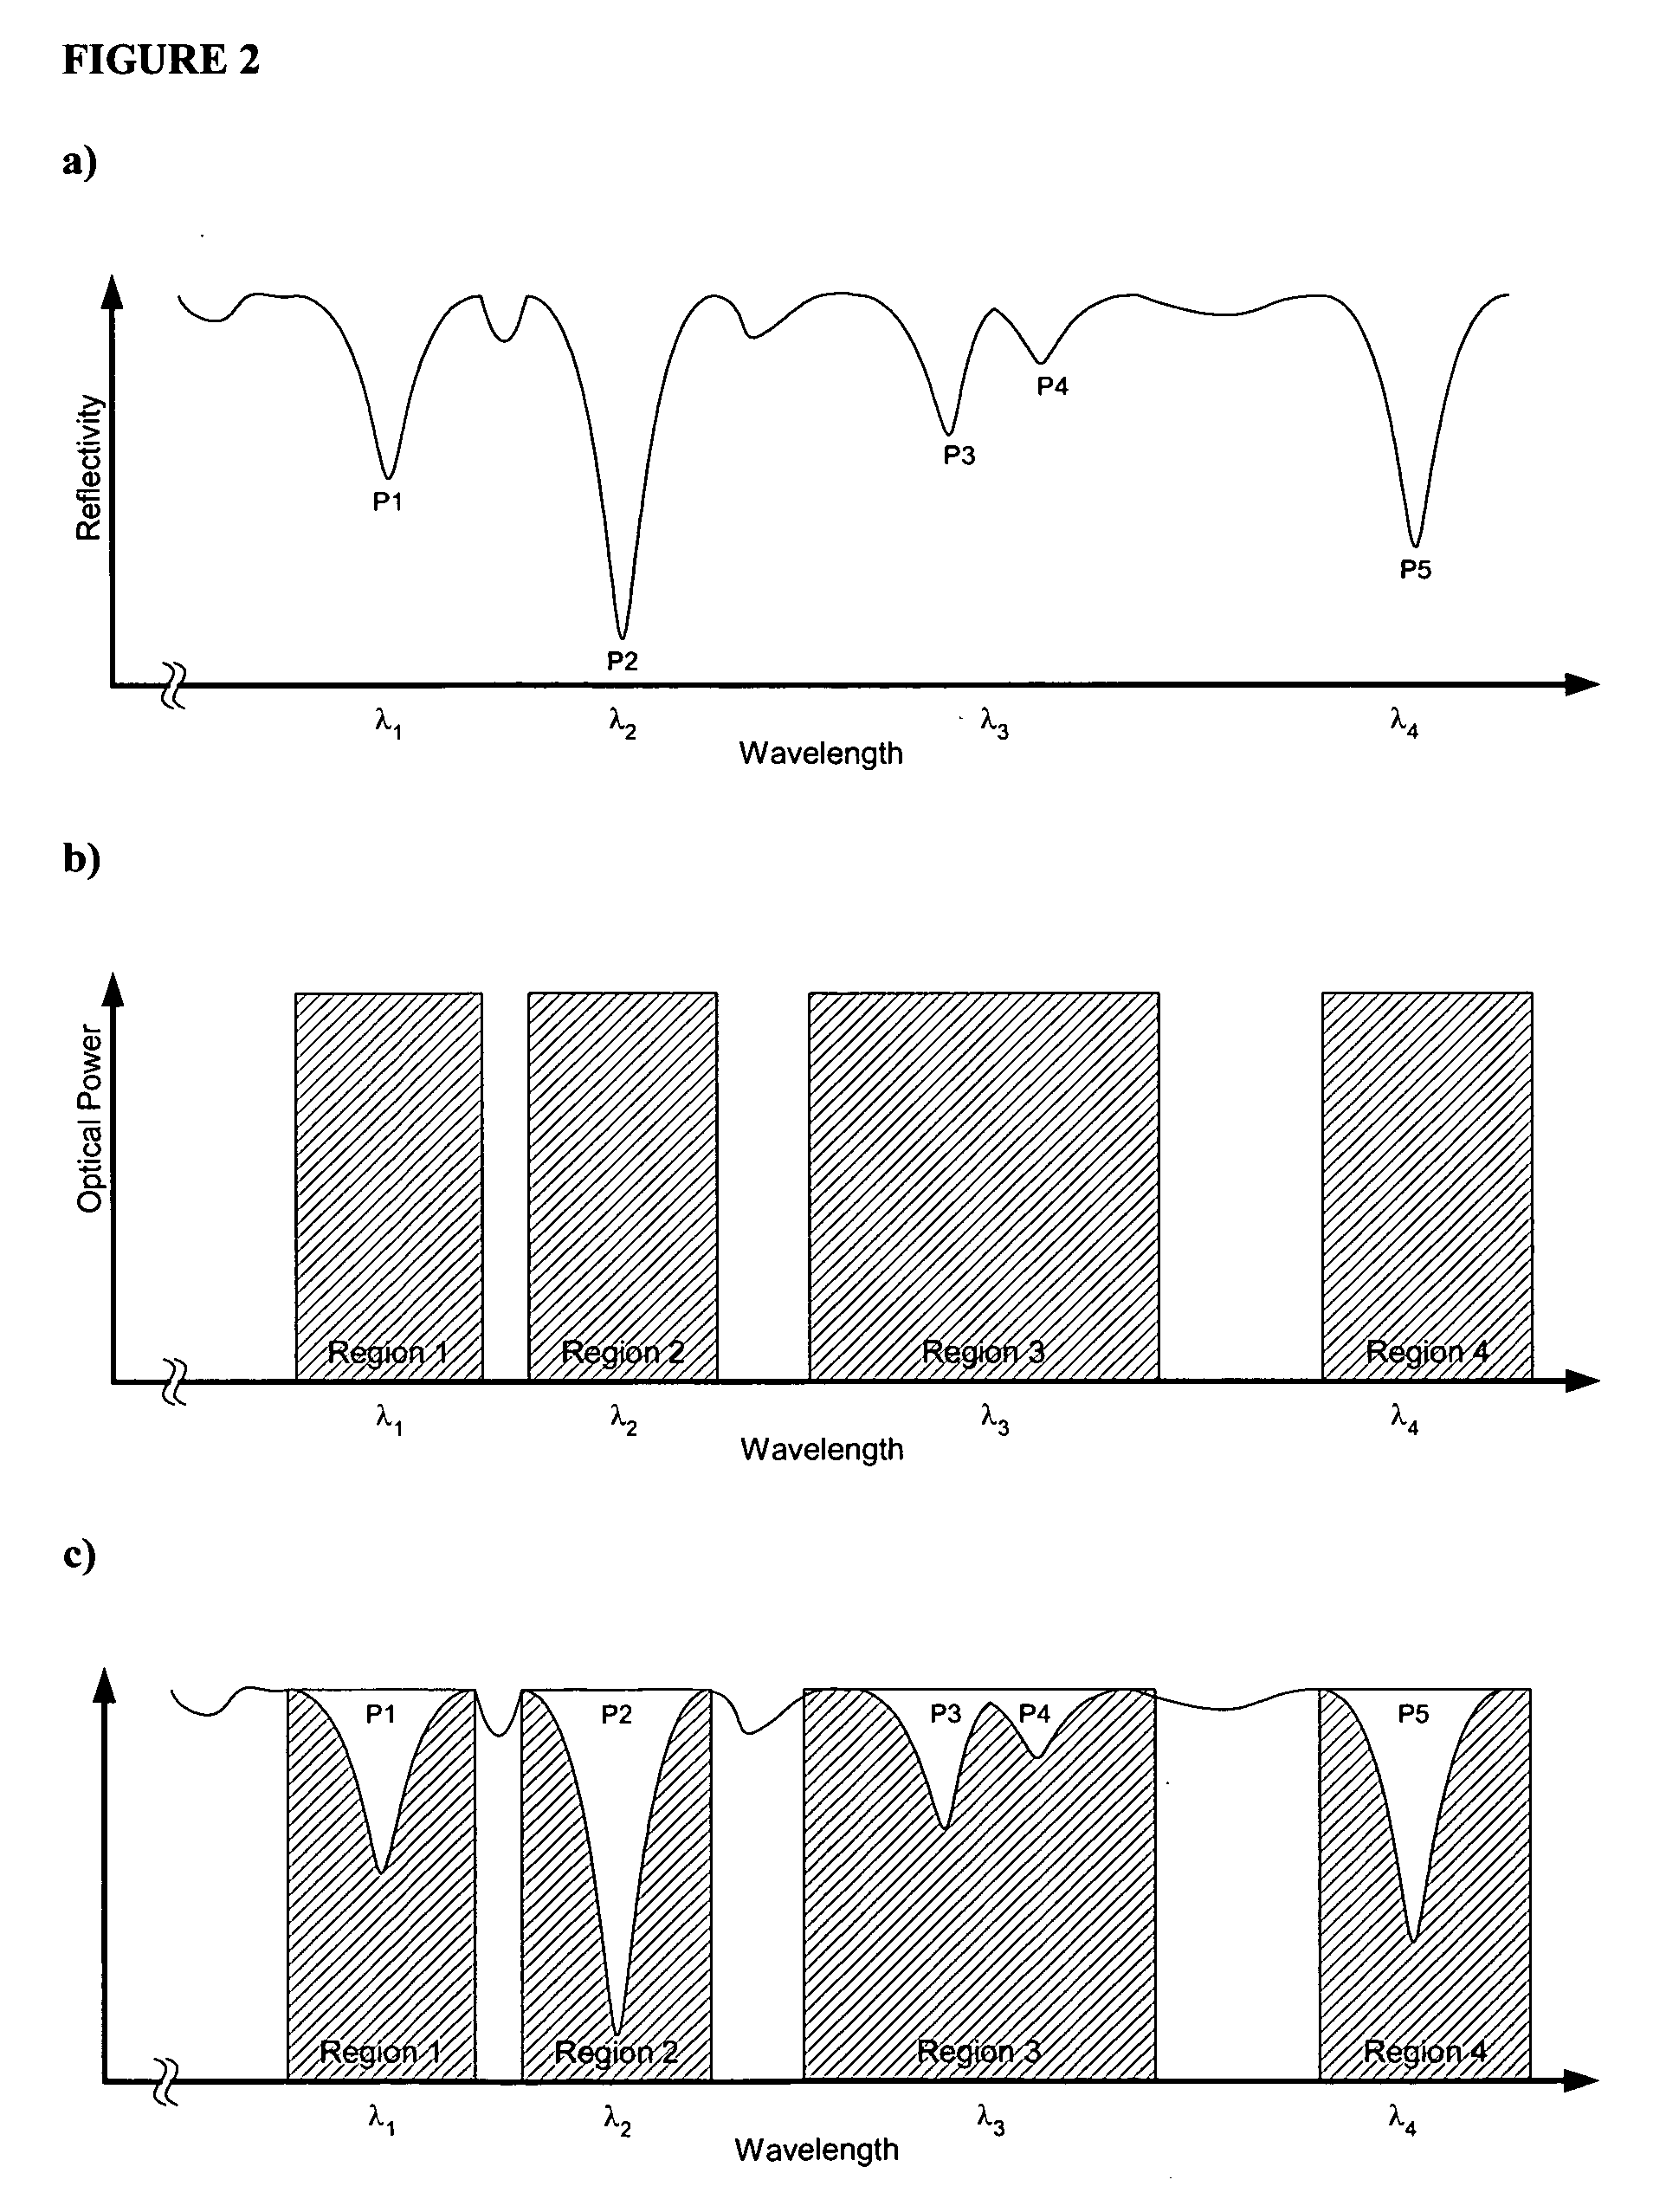 System and method for measuring arterial vessels using near infrared spectroscopy at simultaneous multiple wavelengths